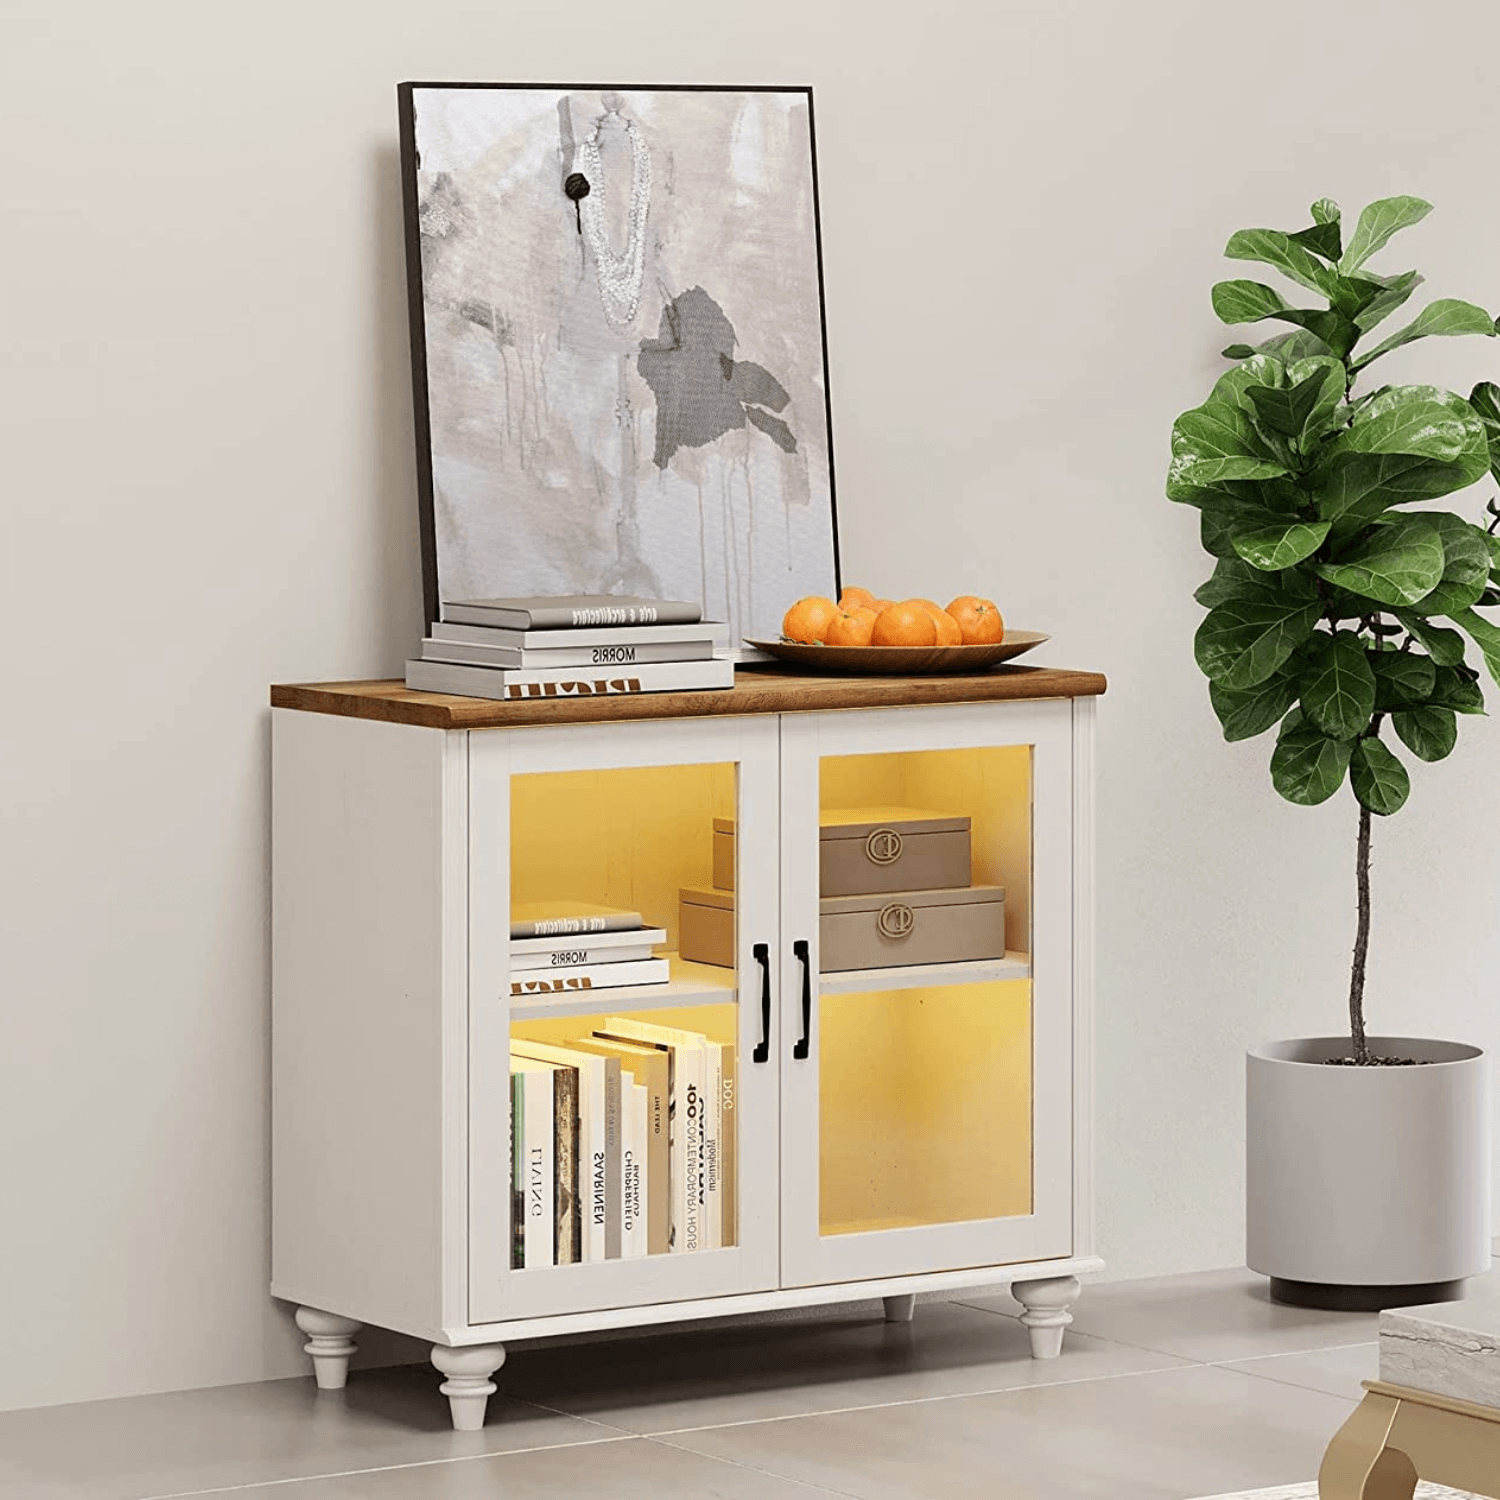 WAMPAT 68" LED Kitchen Buffet Cabinet with Storage Cabinet & 3 Drawers, Accent Sideboard Cupboard with Adjustable Shelf, White